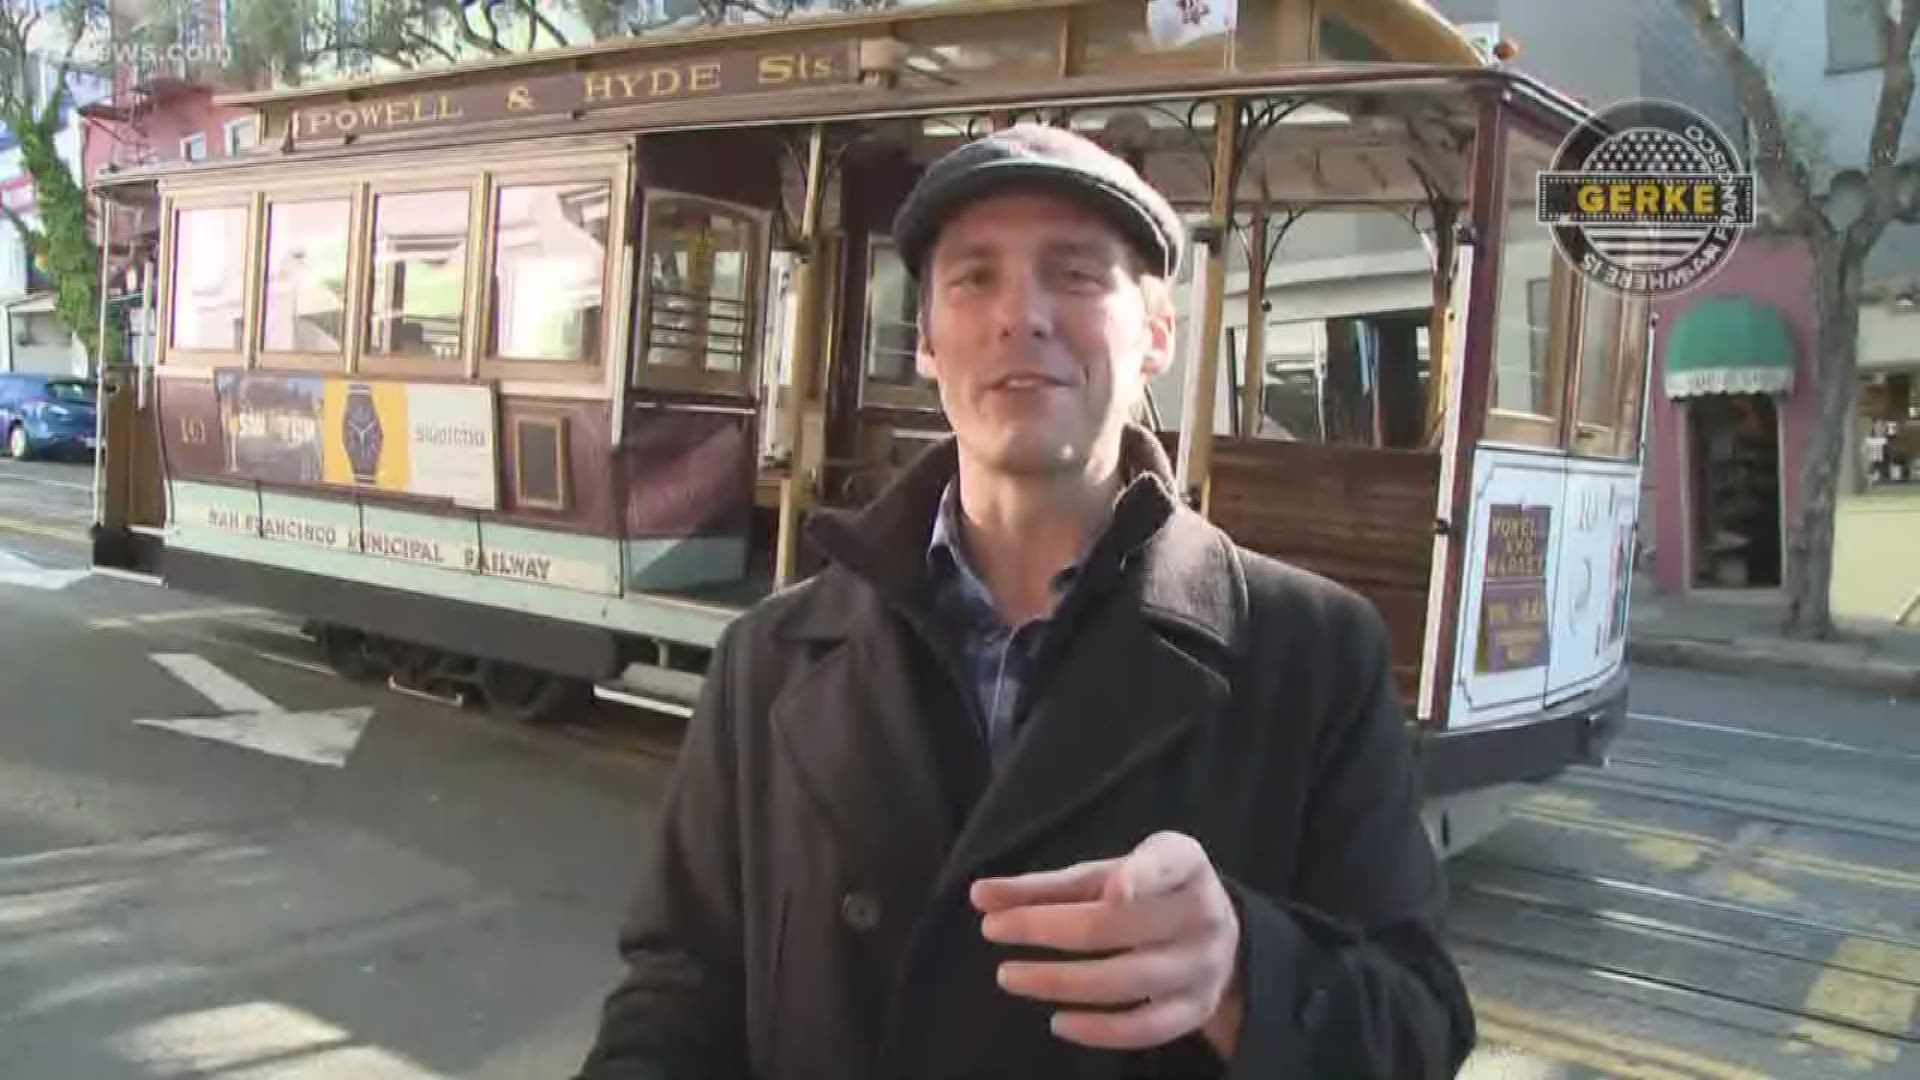 The cable cars are a popular mode of transportation in San Francisco.